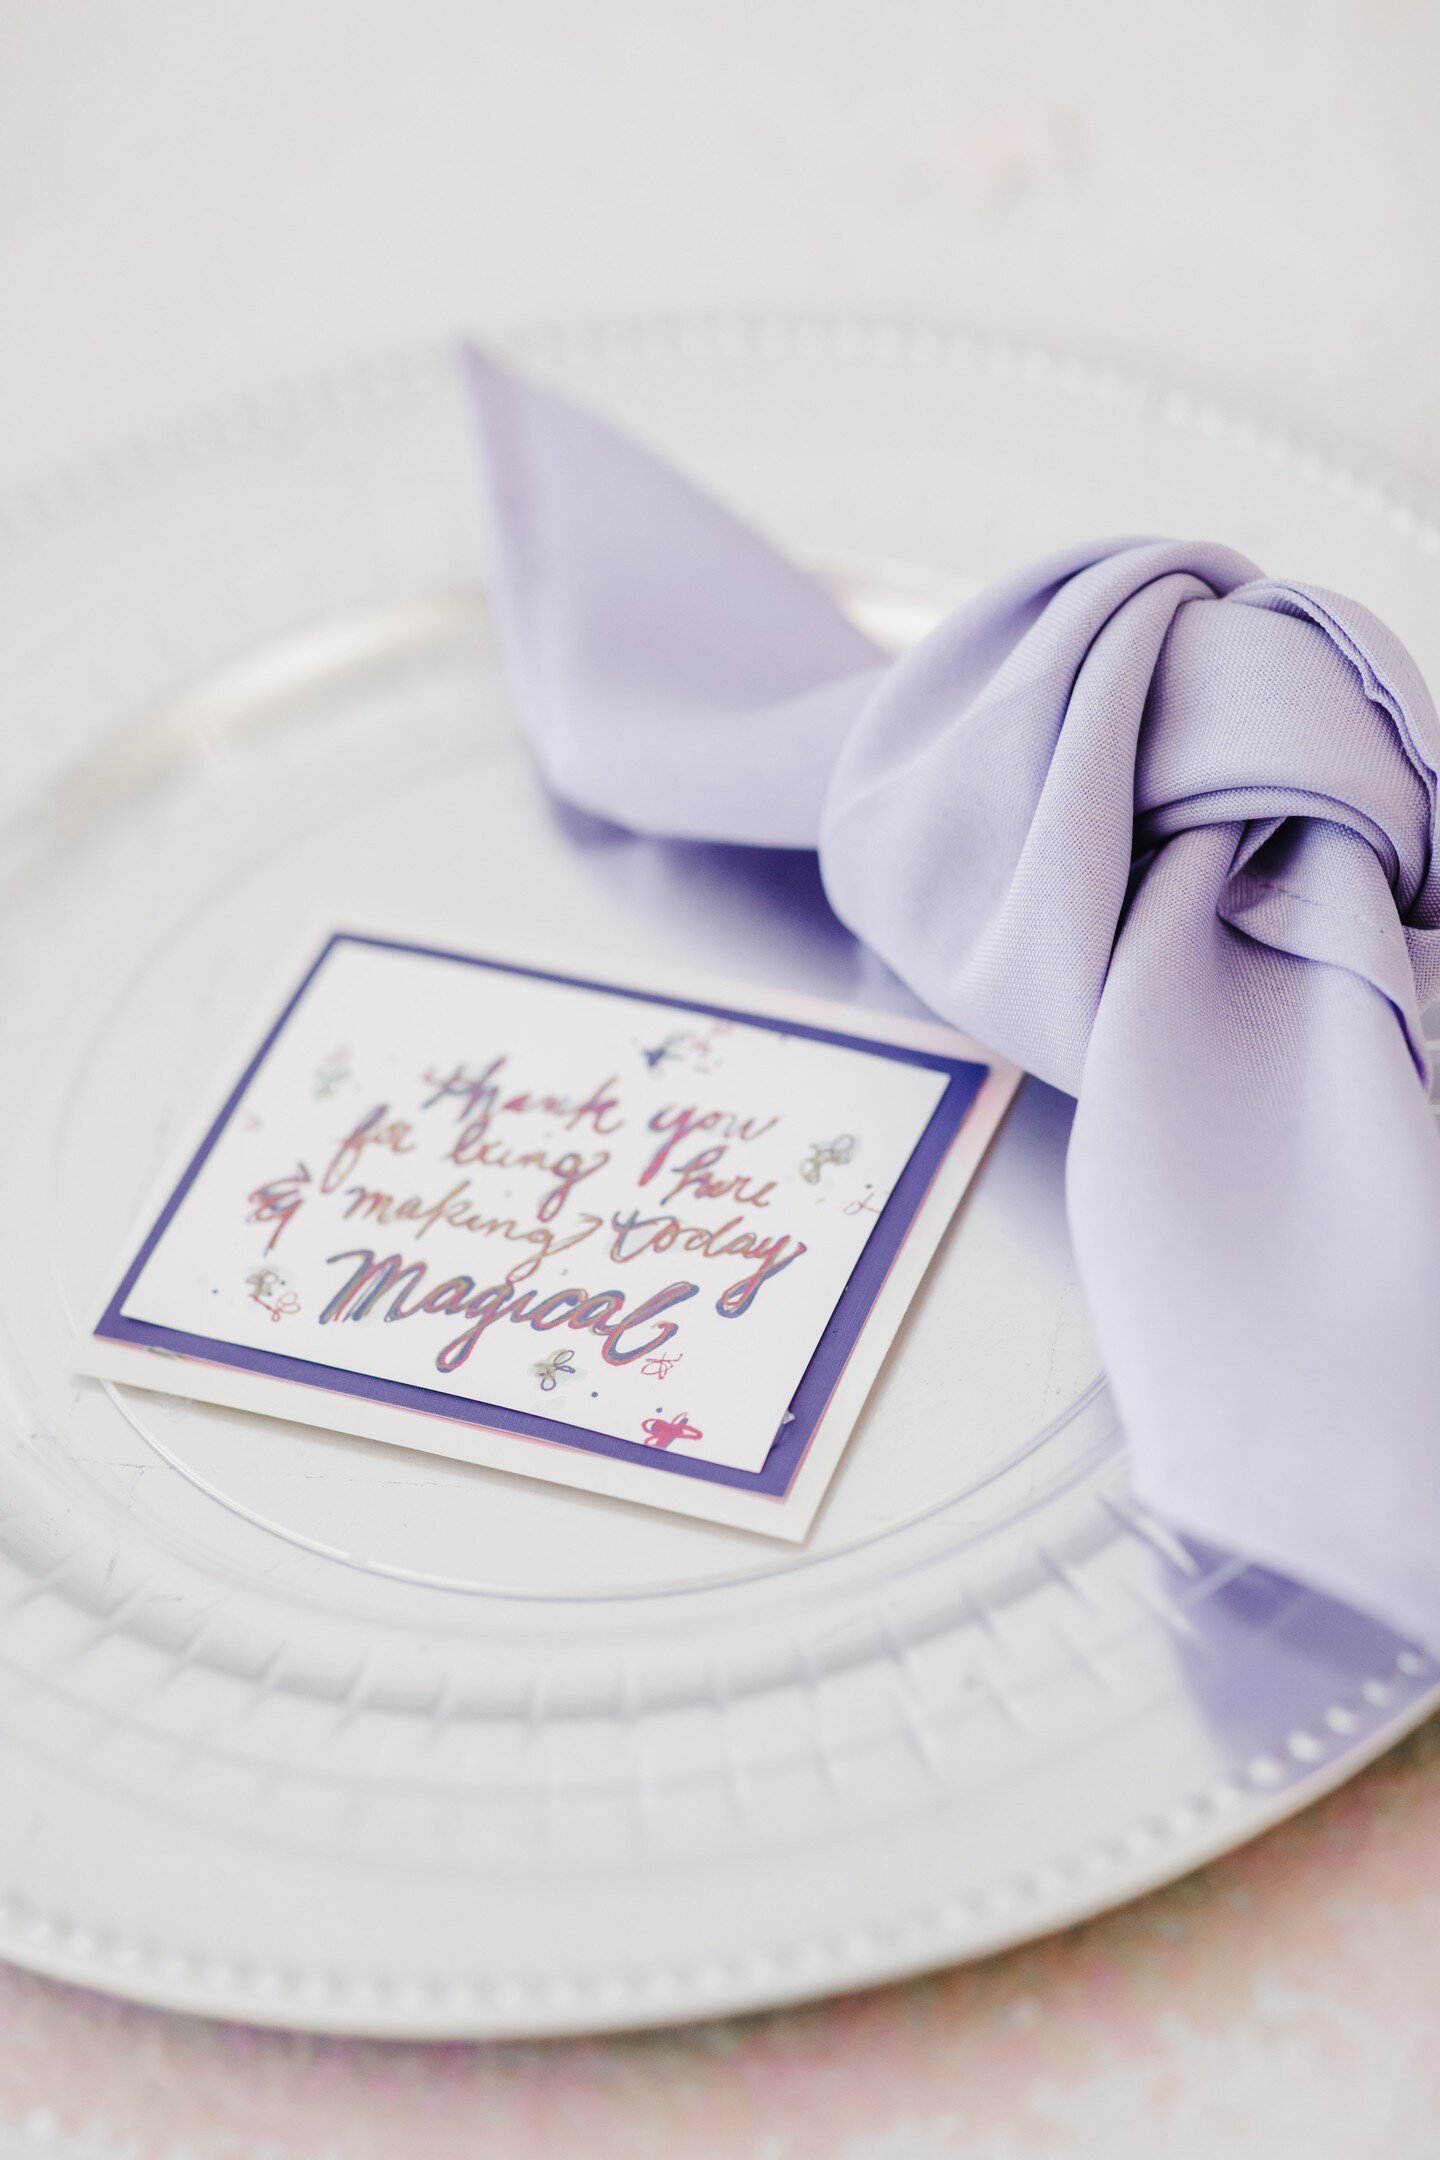 We can make the most 𝓶𝓪𝓰𝓲𝓬𝓪𝓵 custom stationary for any event✨ These colorful place card settings were the perfect touch to add to our &ldquo;𝓞𝓱 𝓖𝓵𝓸𝔀 𝓖𝓲𝓻𝓵 &rdquo; decor package💟
*
*
*
#ohiopartyvenue #ohioeventspace #ohioeventvenue #